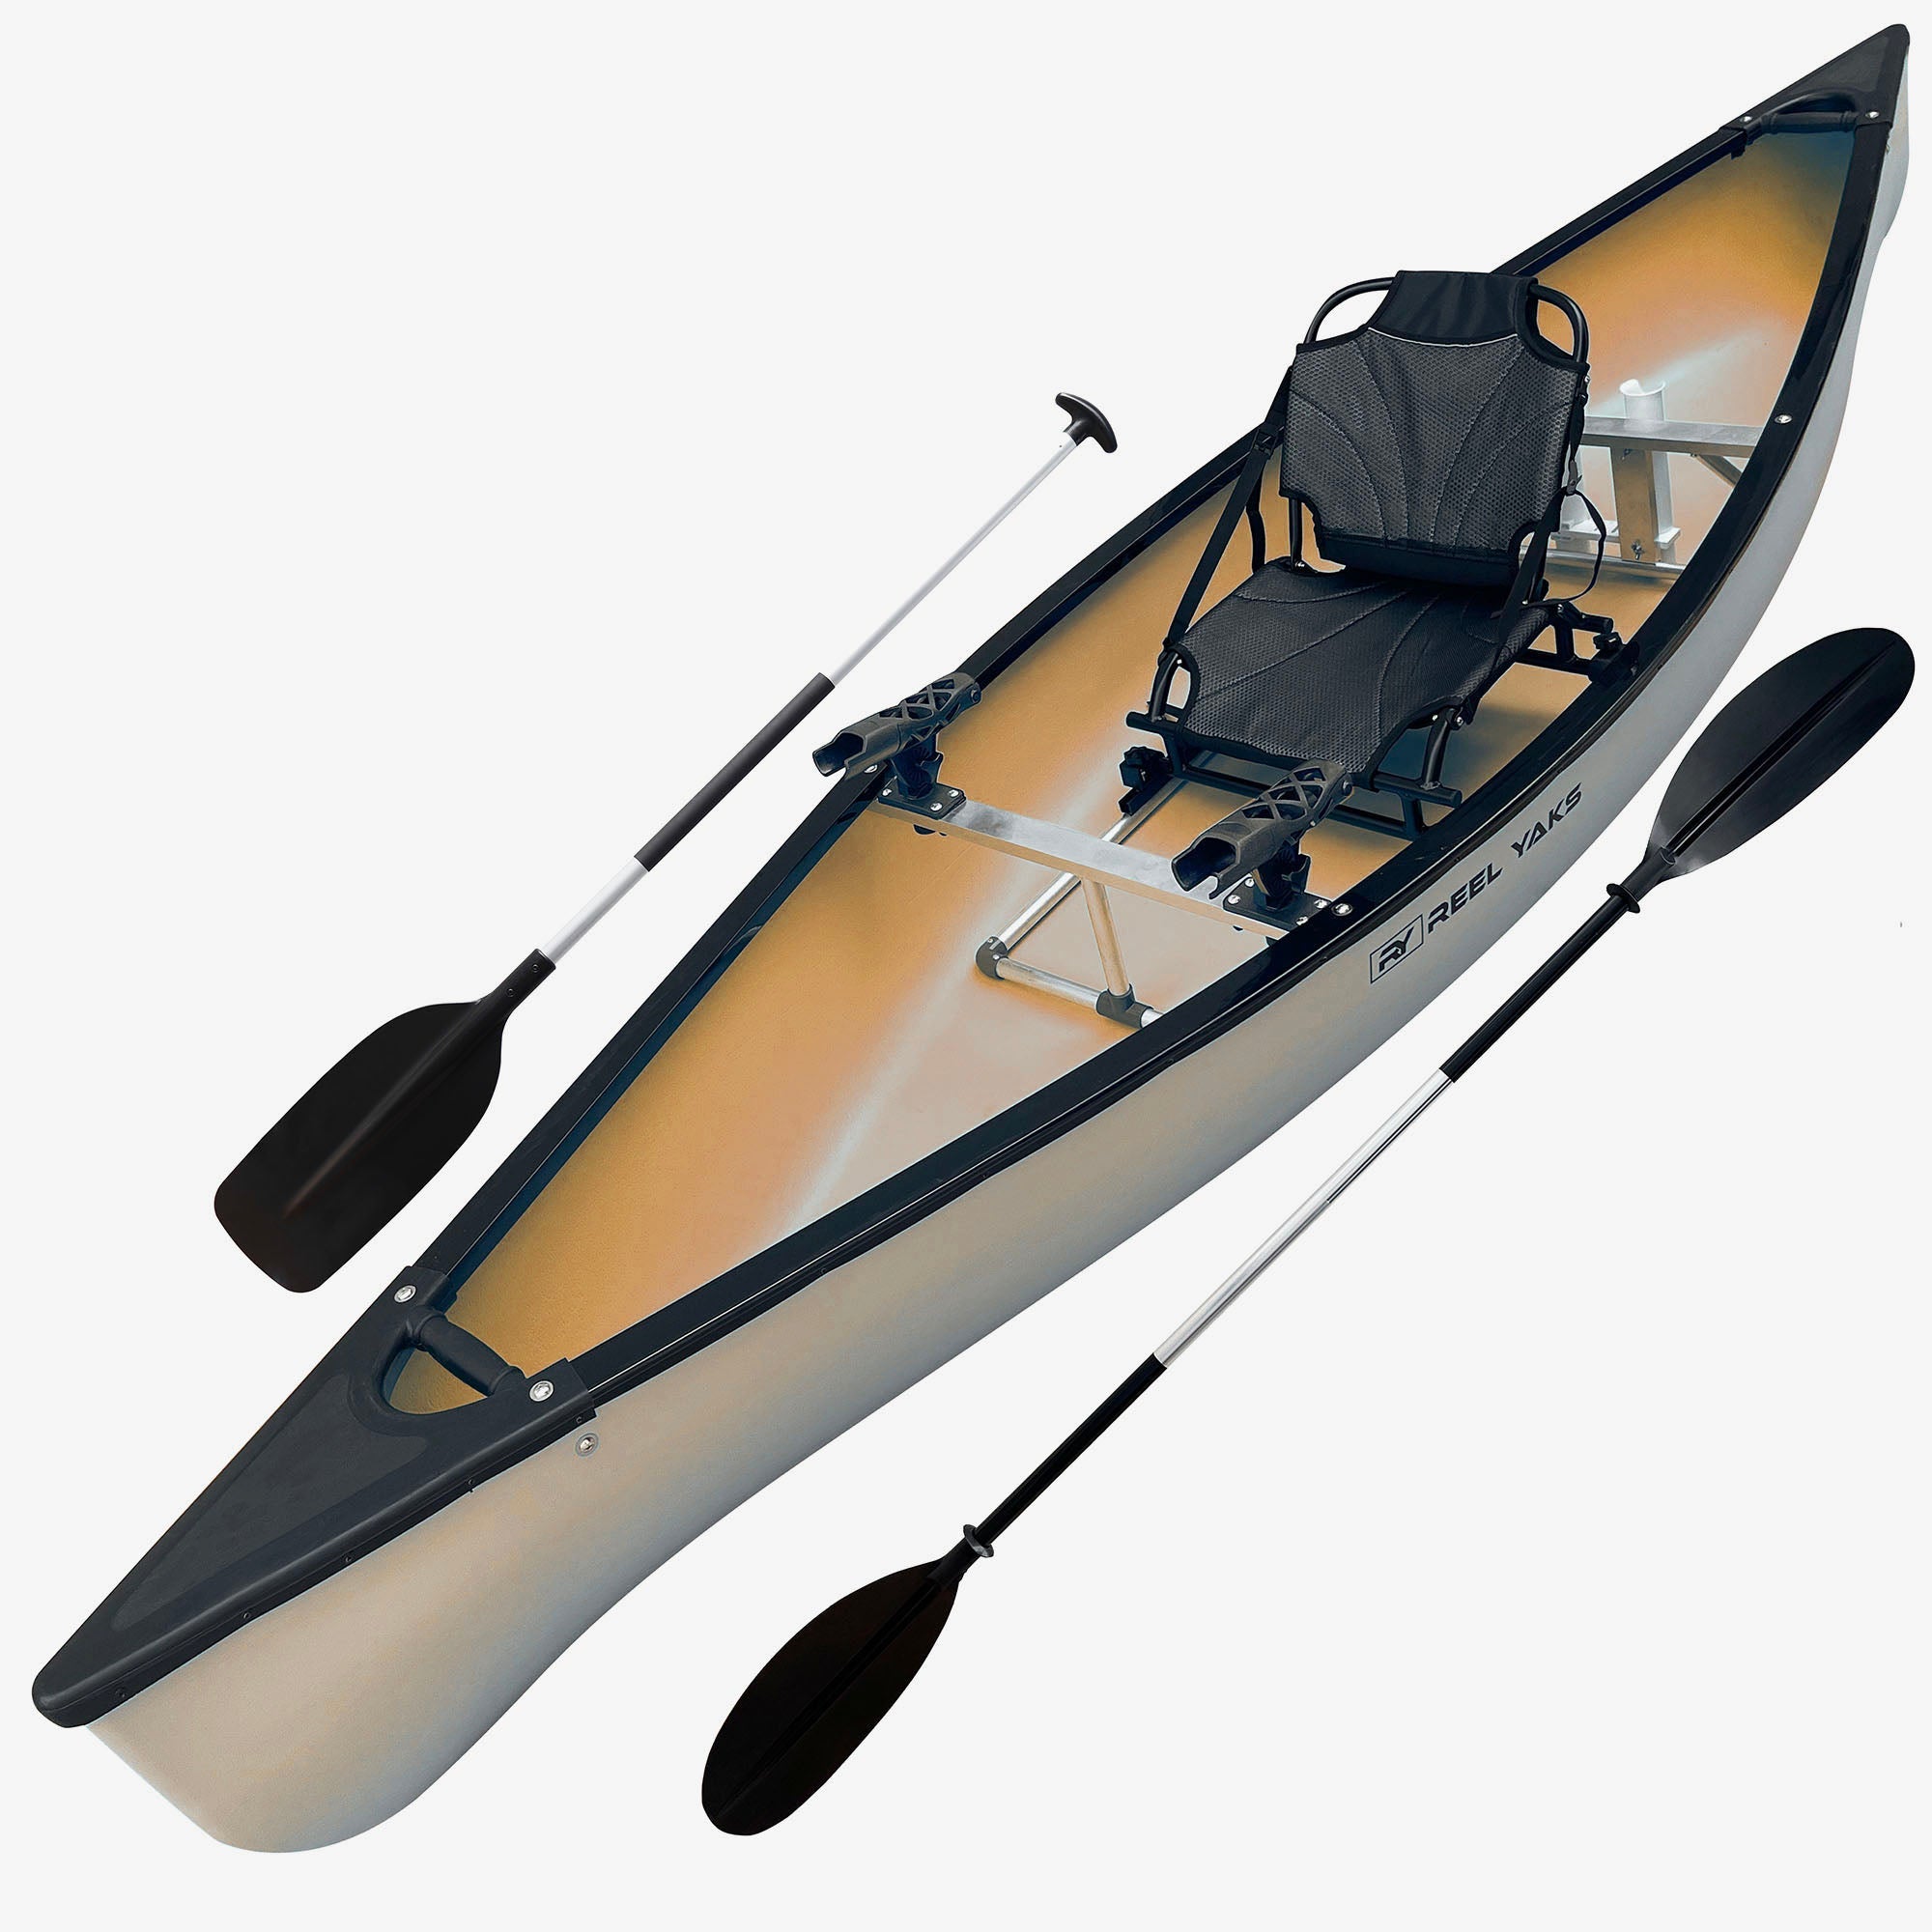 12.5' Canoe for Fishing, Expeditions or Exercise | 1 Person | Comfortable seat with 2 Paddles | Lightweight Stable & Easy to Maneuver | 400lb Capacity to Hold All Your Gear | Familia Canoa